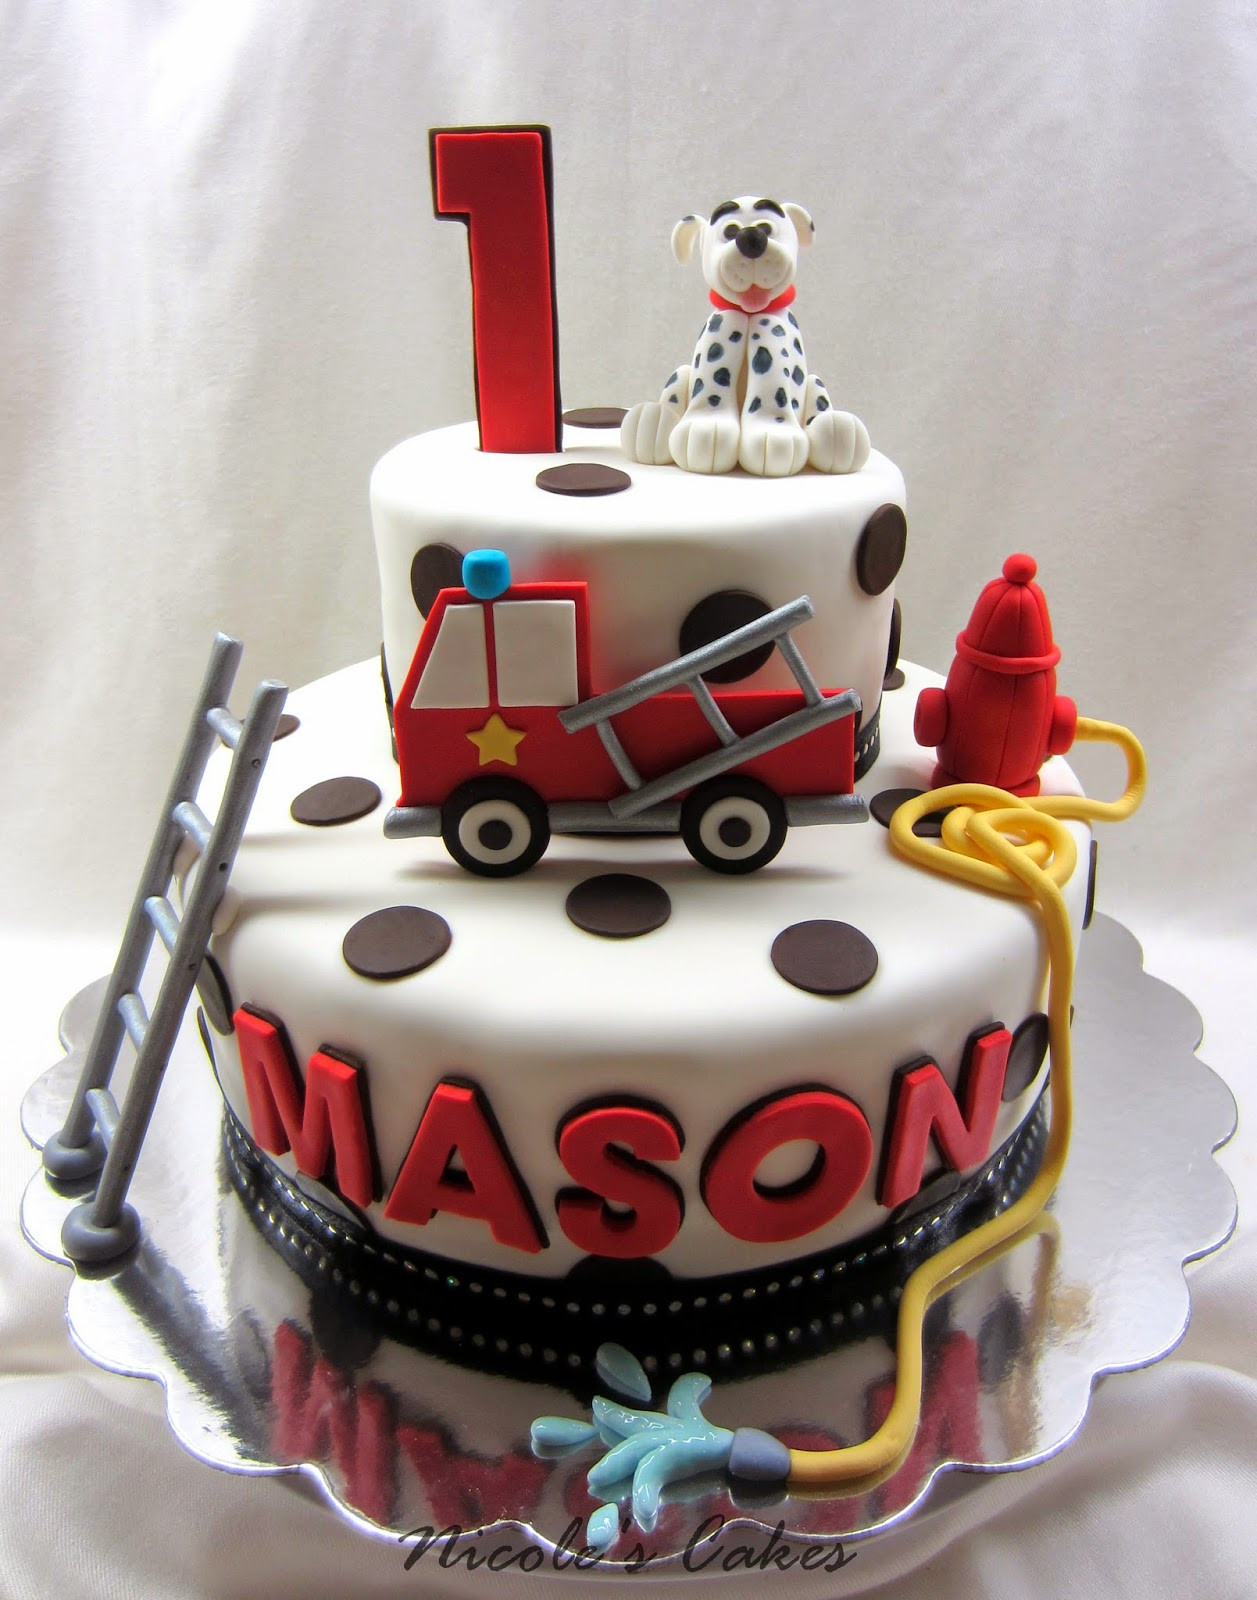 Firefighter Birthday Cake
 Confections Cakes & Creations Firetruck & Dalmation 1st